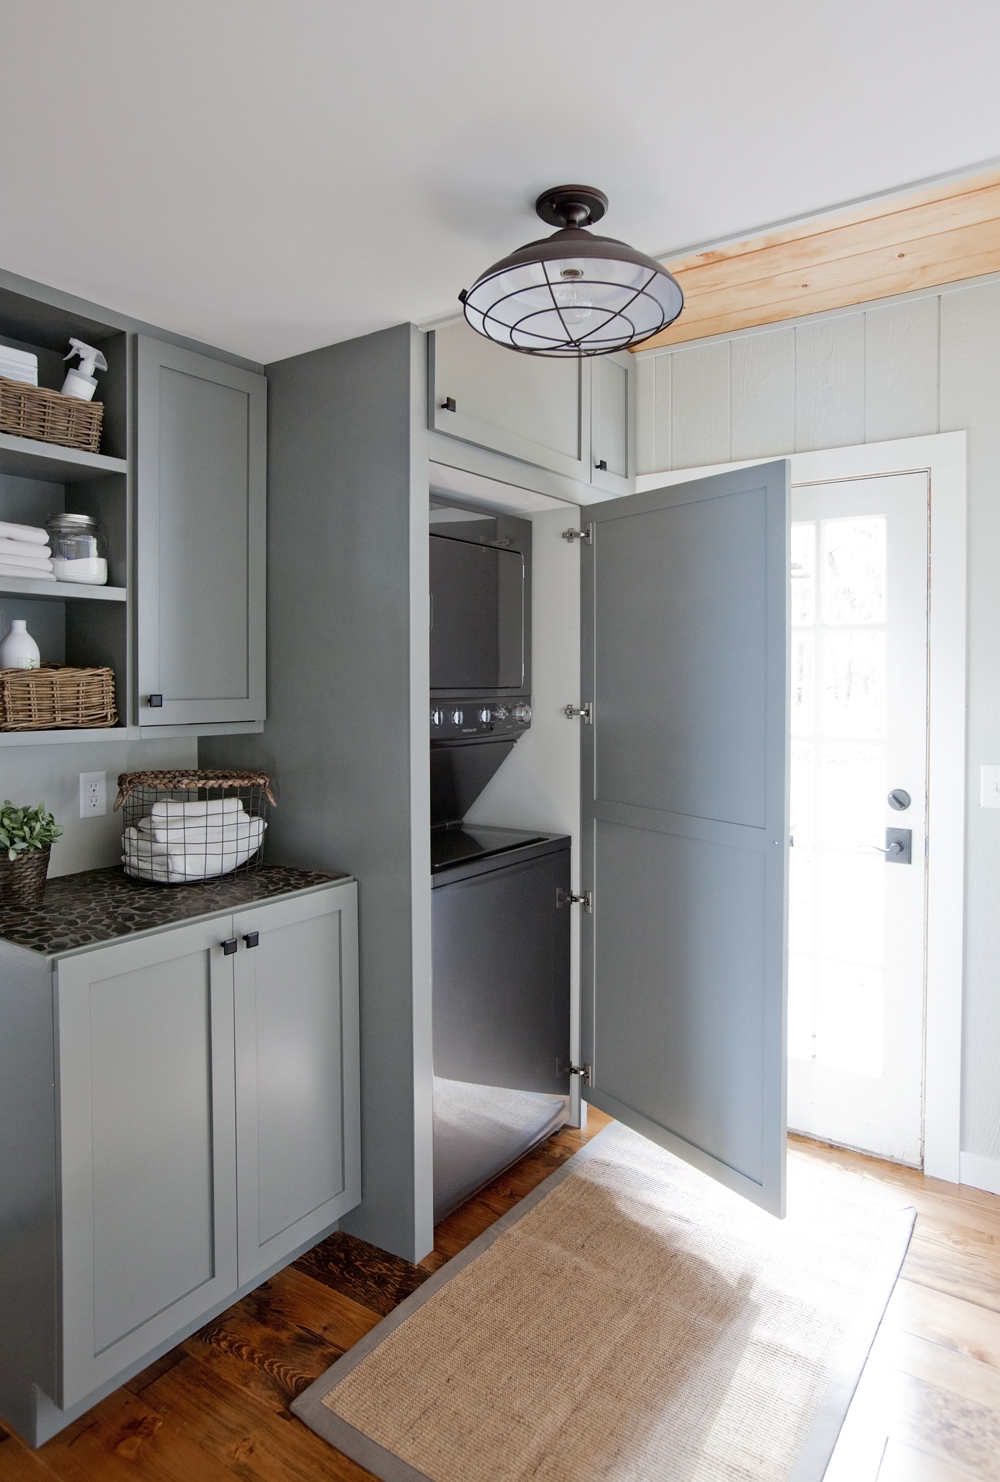 Bright laundry room with grey-blue custom cabinetry and washer and dryer concealed behind cupboard.